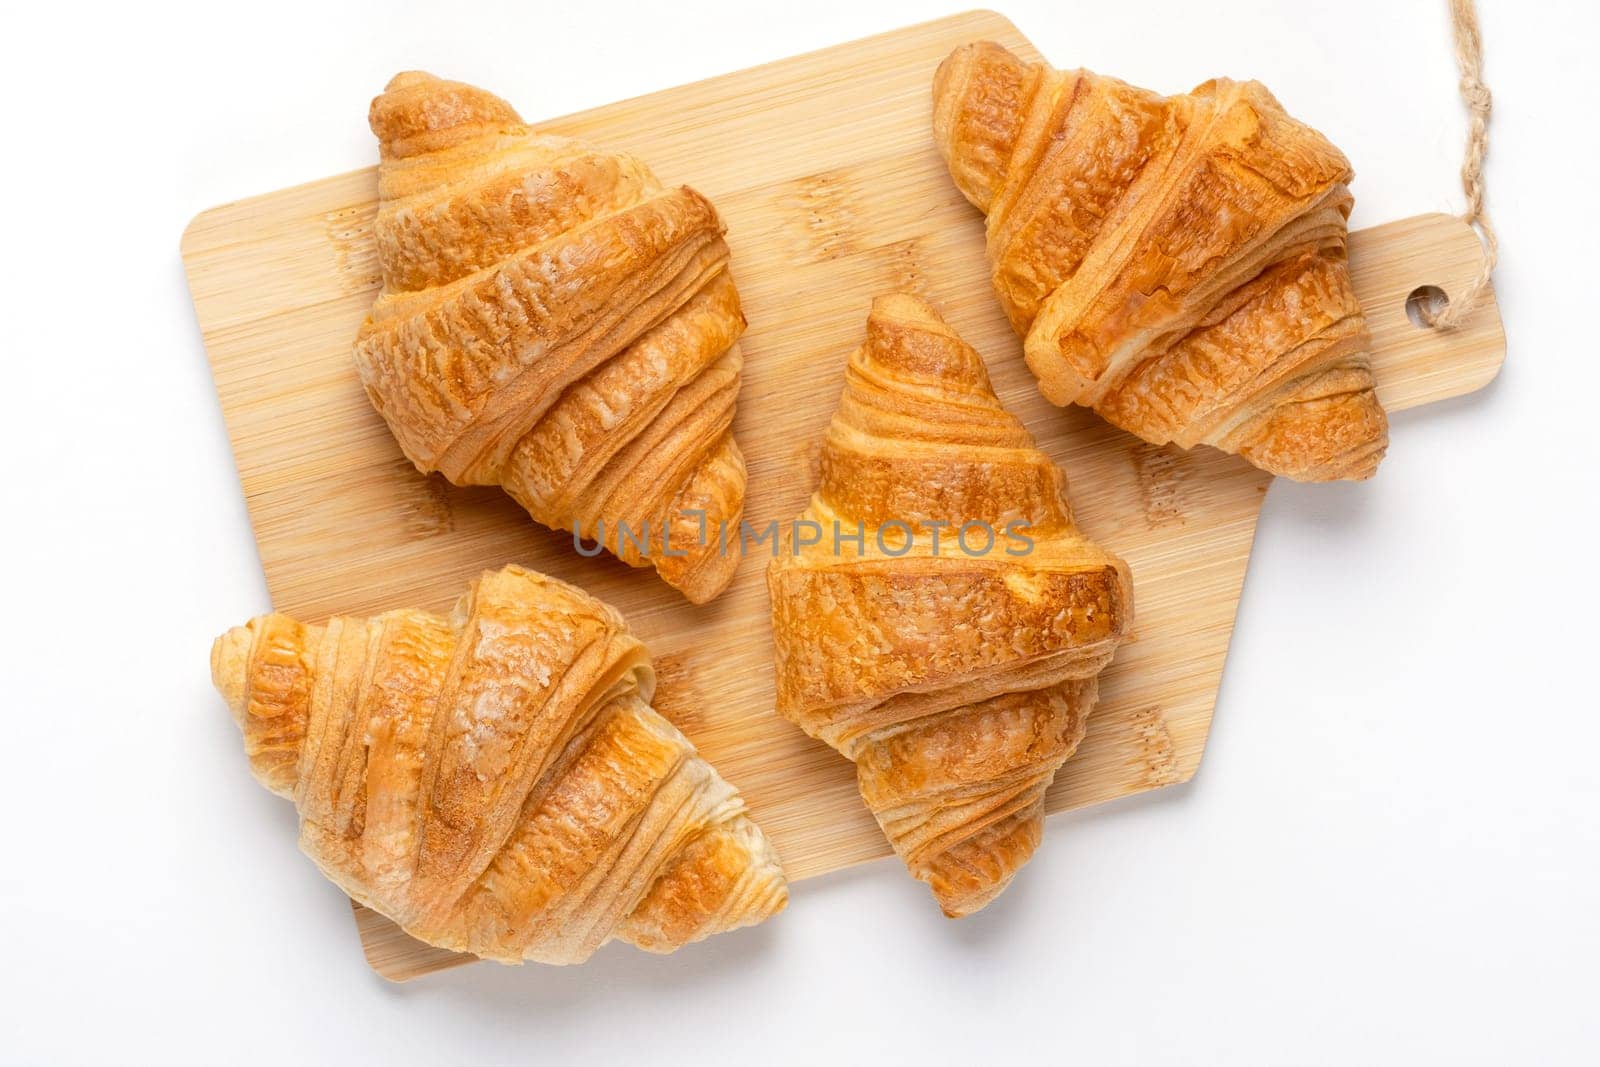 French croissants for breakfast. Freshly baked croissants on cutting board, isolated on white background, top view.